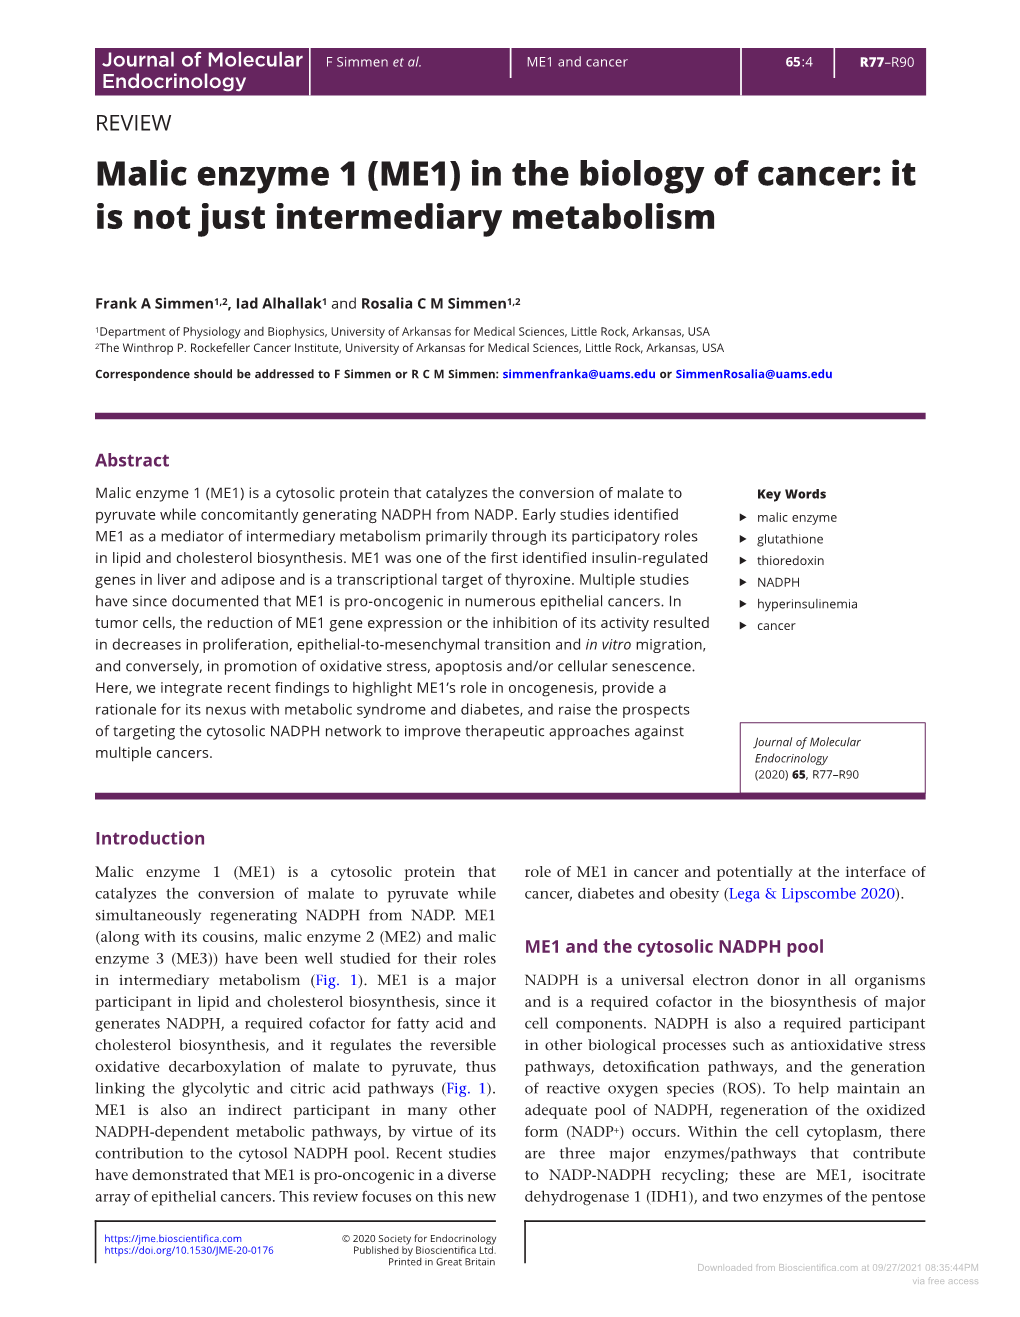 Malic Enzyme 1 (ME1) in the Biology of Cancer: It Is Not Just Intermediary Metabolism